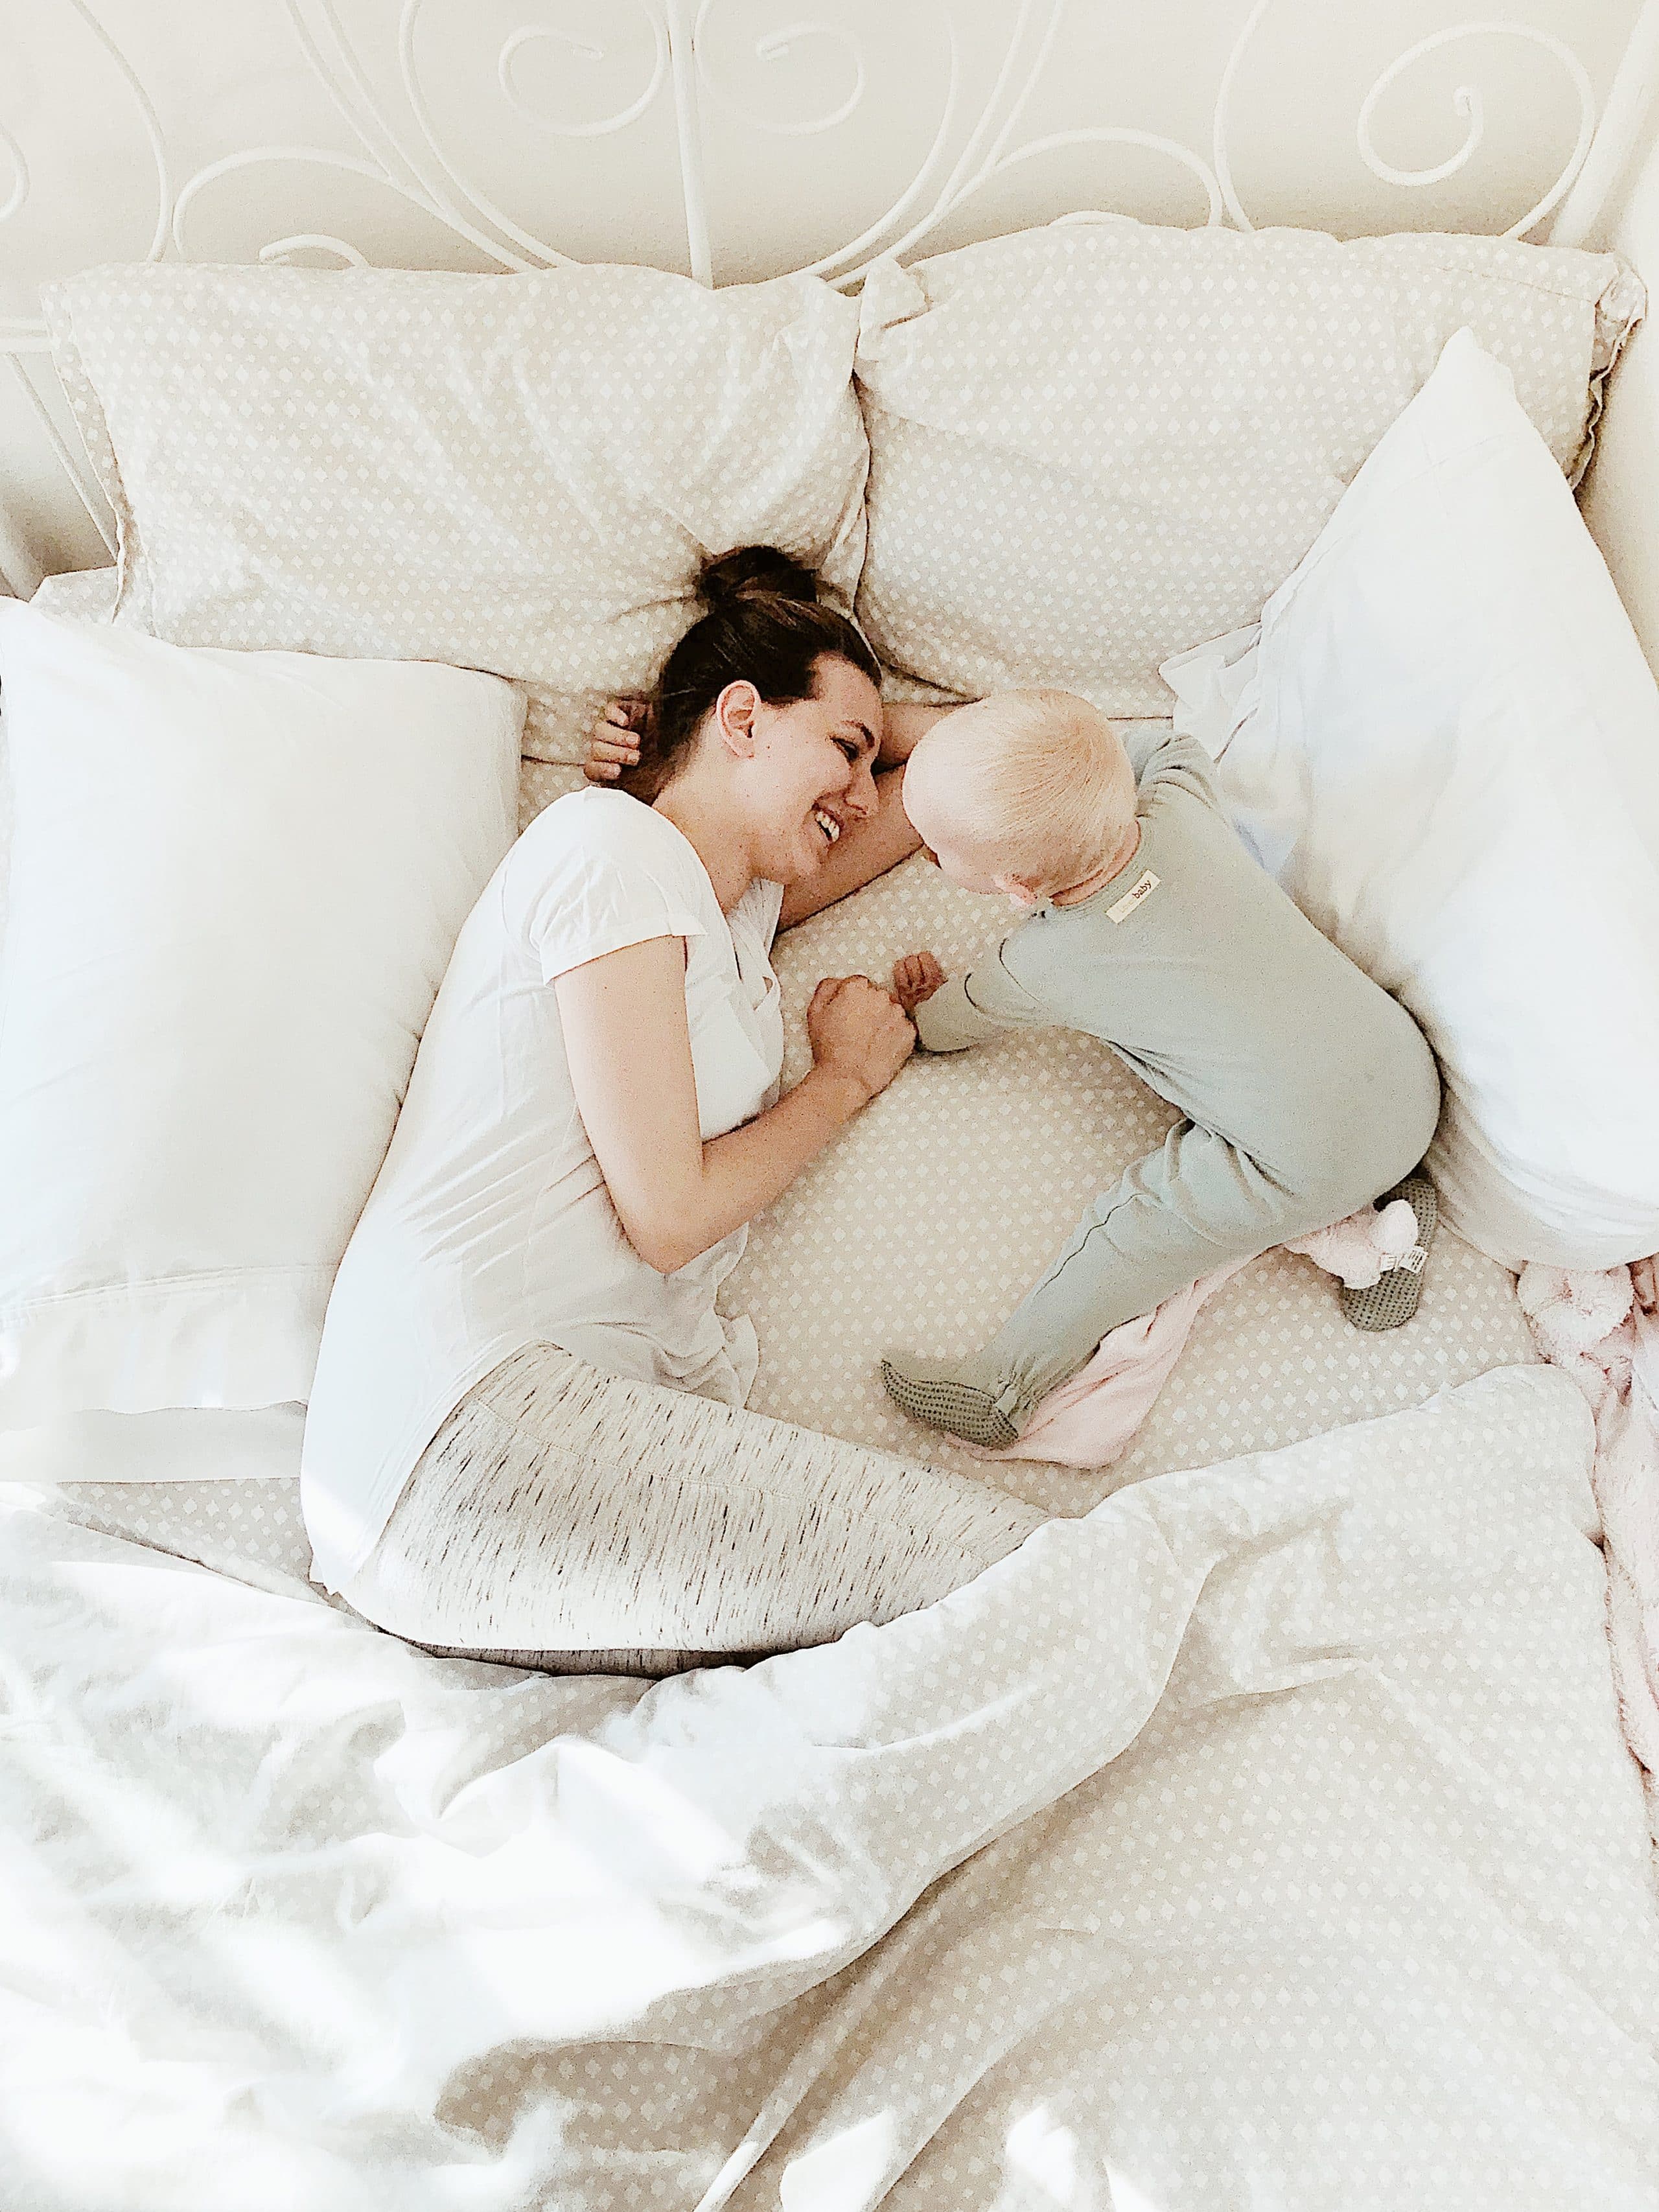 8 Tips for Co-Sleeping Safely and Successfully #cosleeping #motherhood